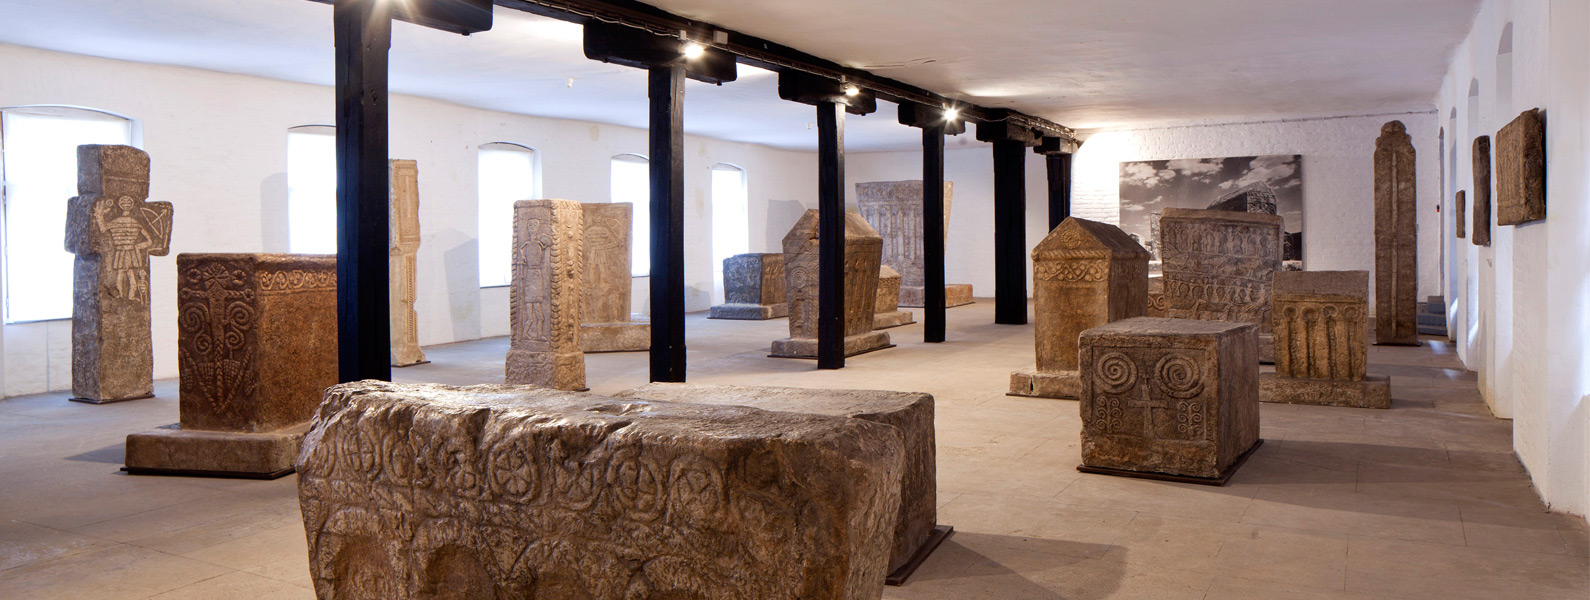 The Collection of Plaster Casts of Tombs